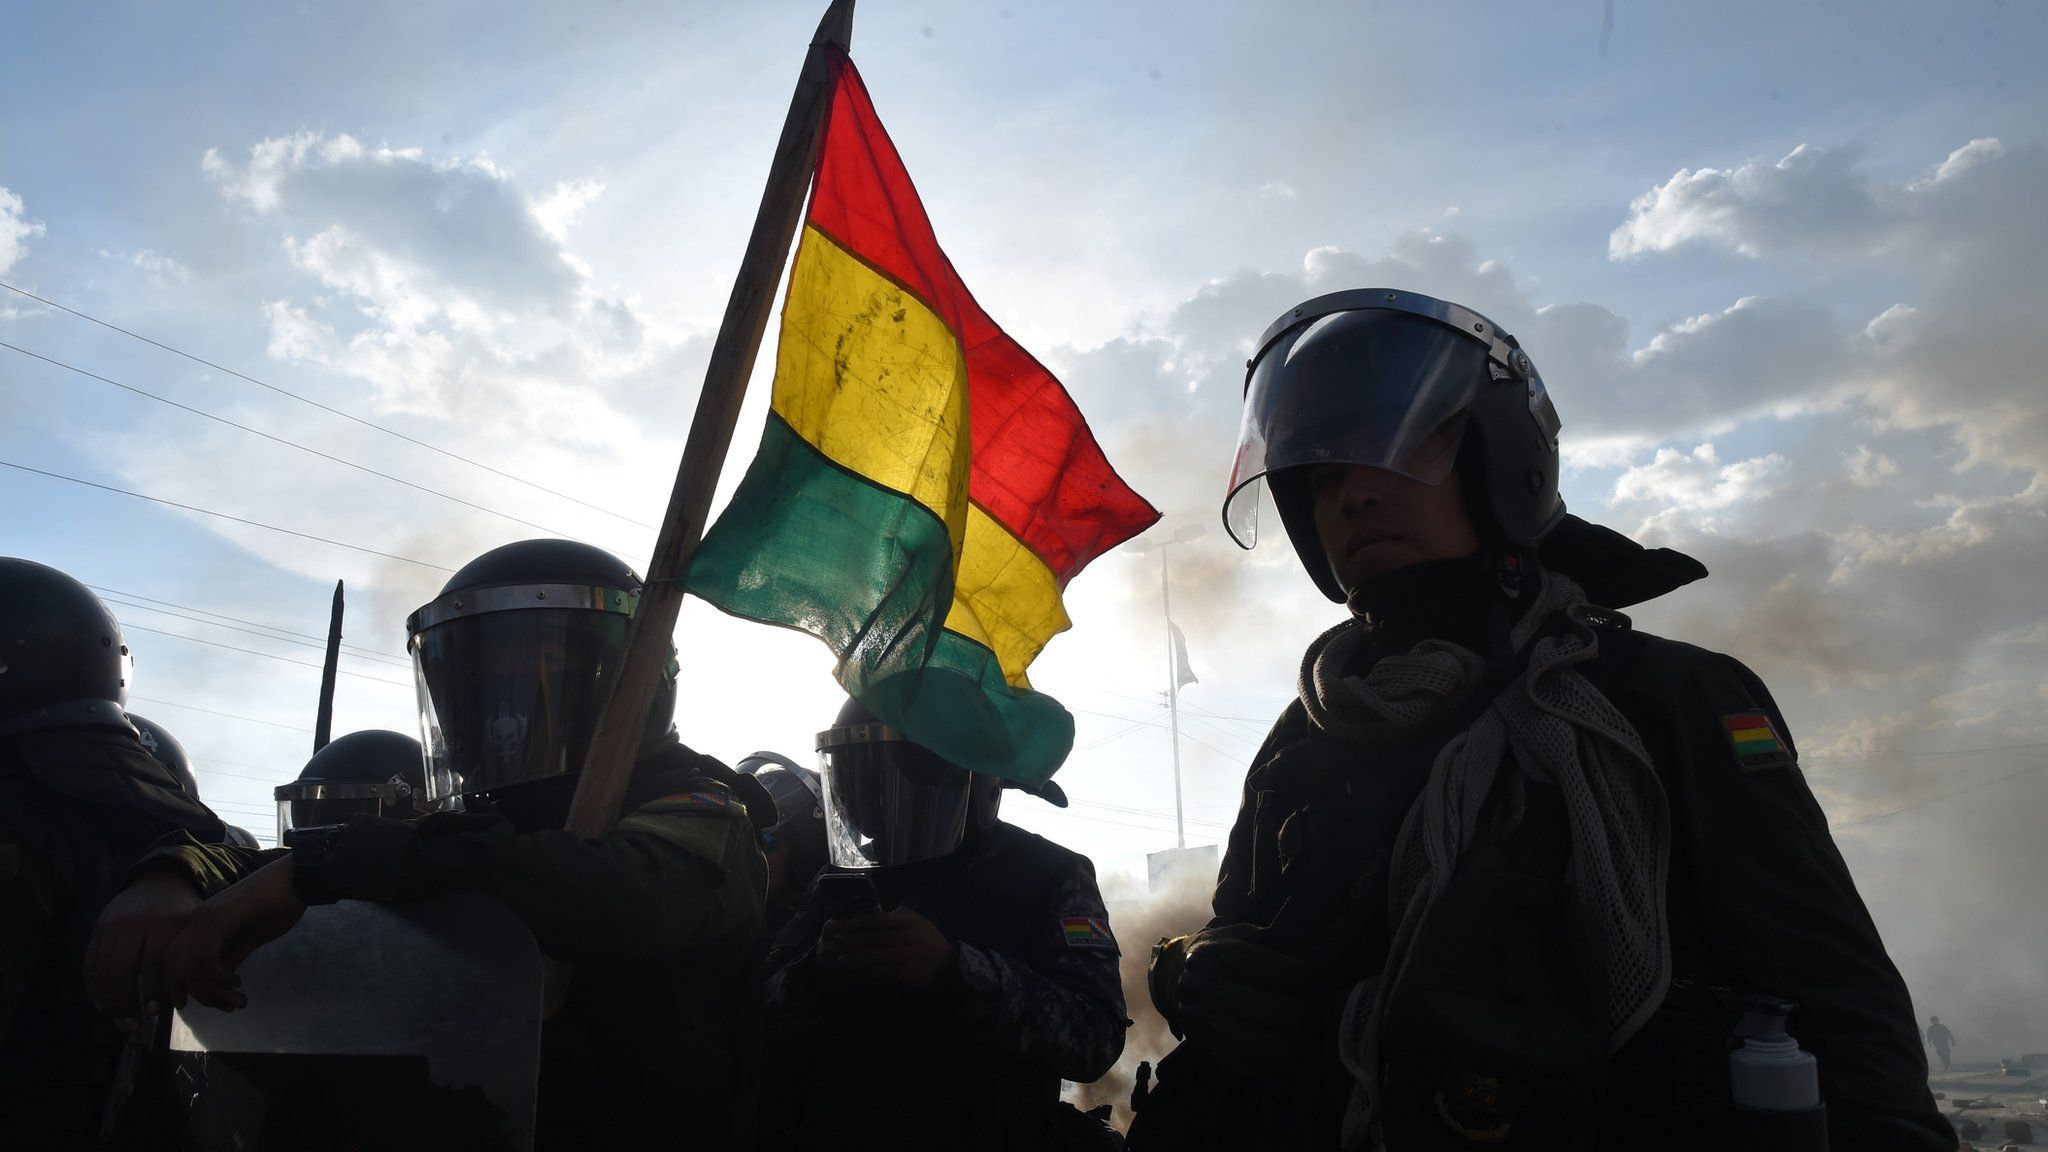 Shadows of riot police seen in Sacaba, with a Bolivian flag